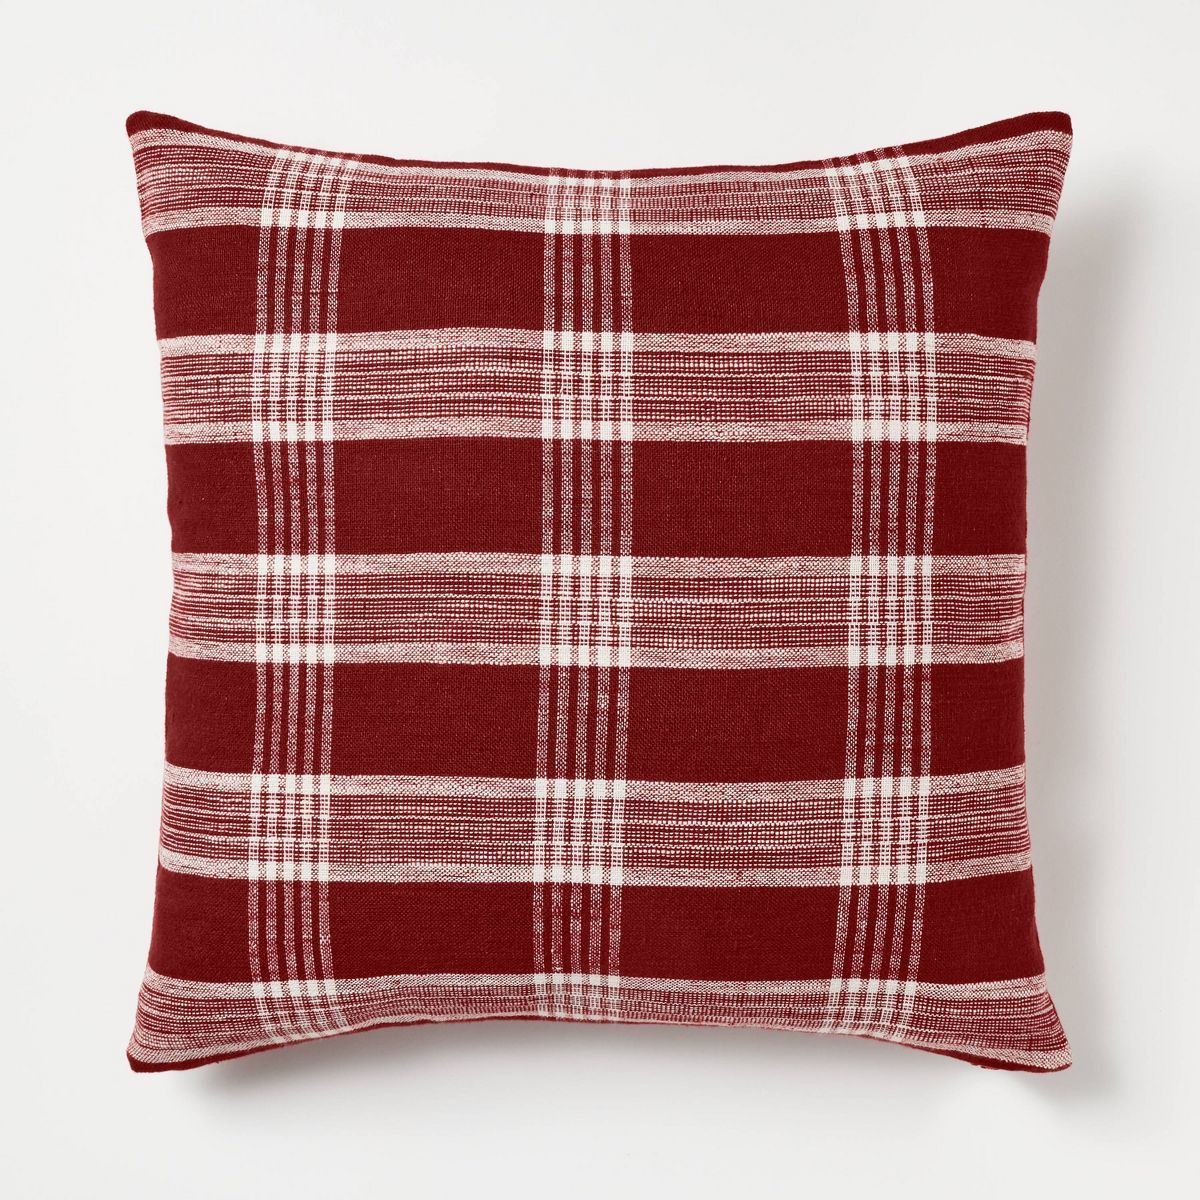 Woven Plaid Square Throw Pillow with Zipper Pull - Threshold™ designed with Studio McGee | Target